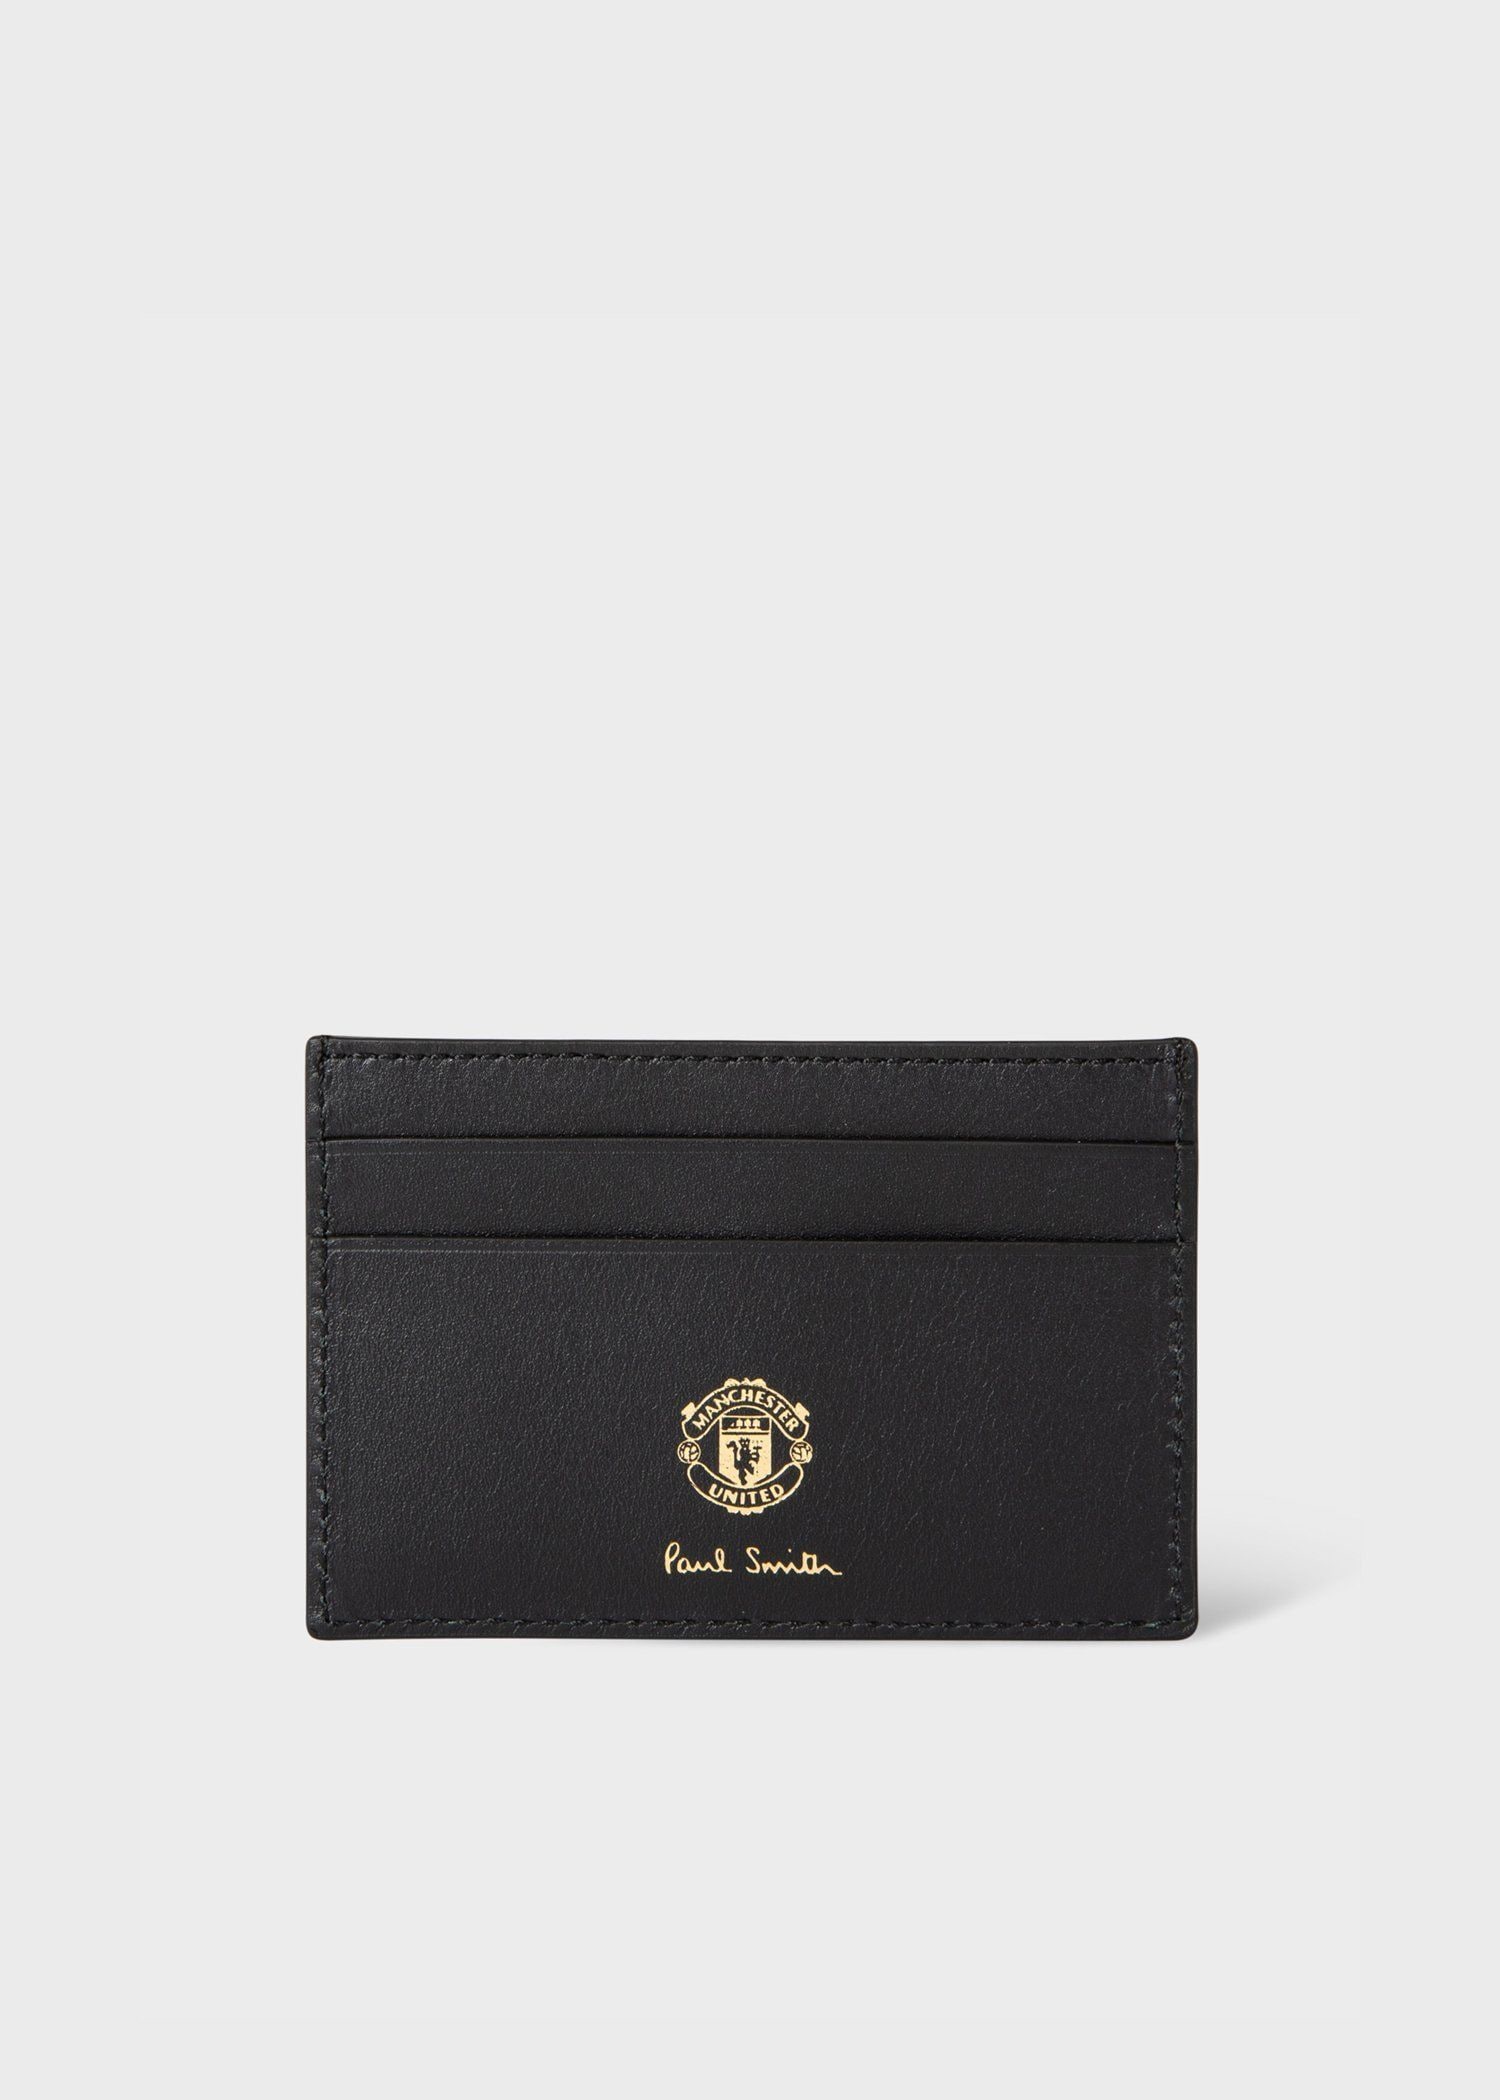 Paul Smith & Manchester United パスケース